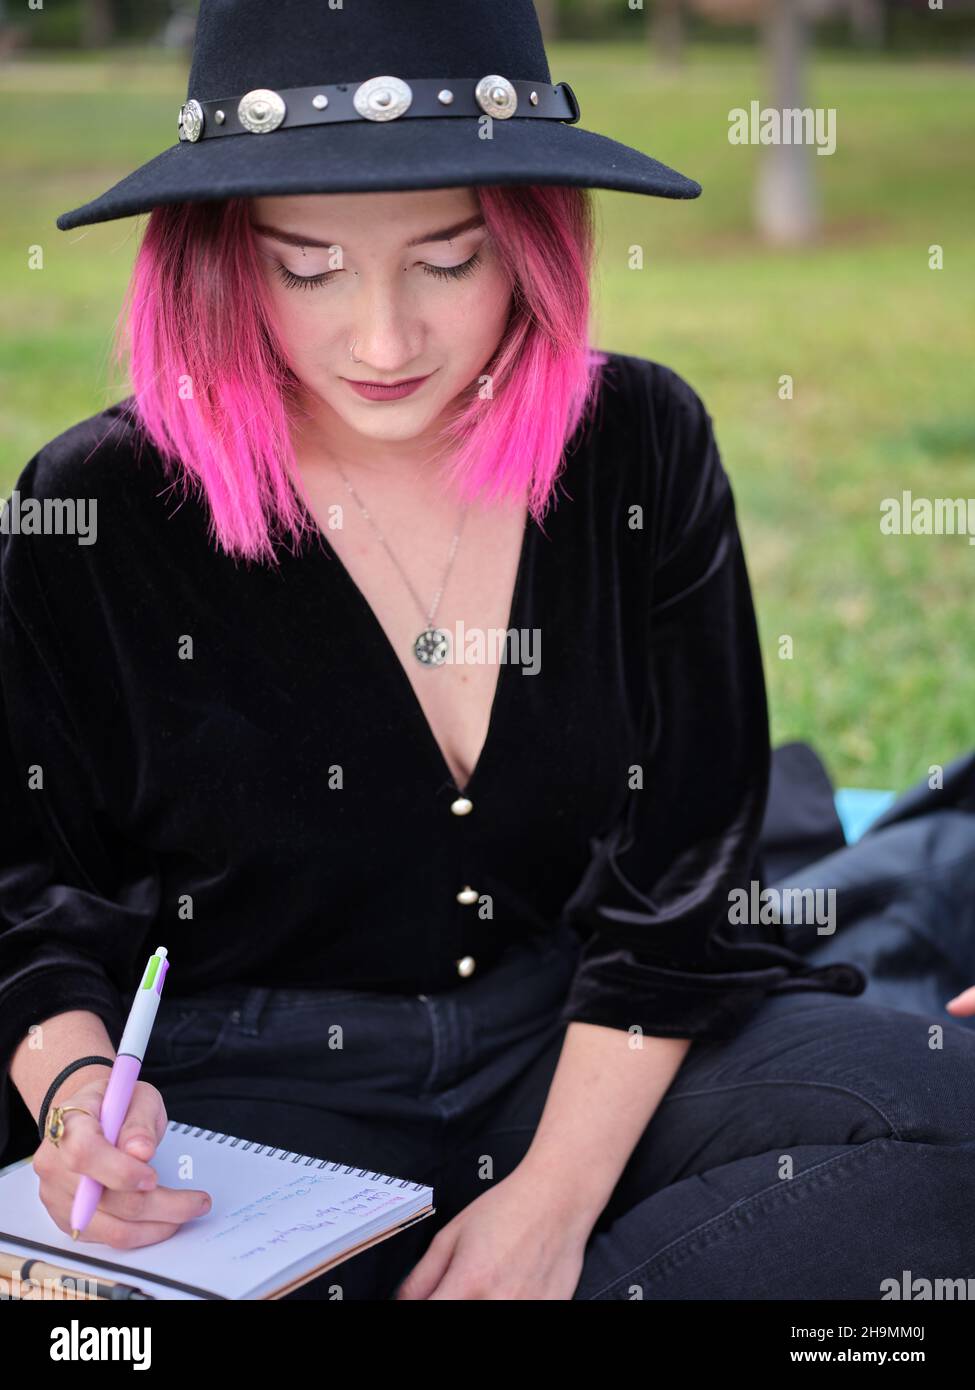 portrait of a young girl with pink hair and a black hat sitting with a notebook Stock Photo